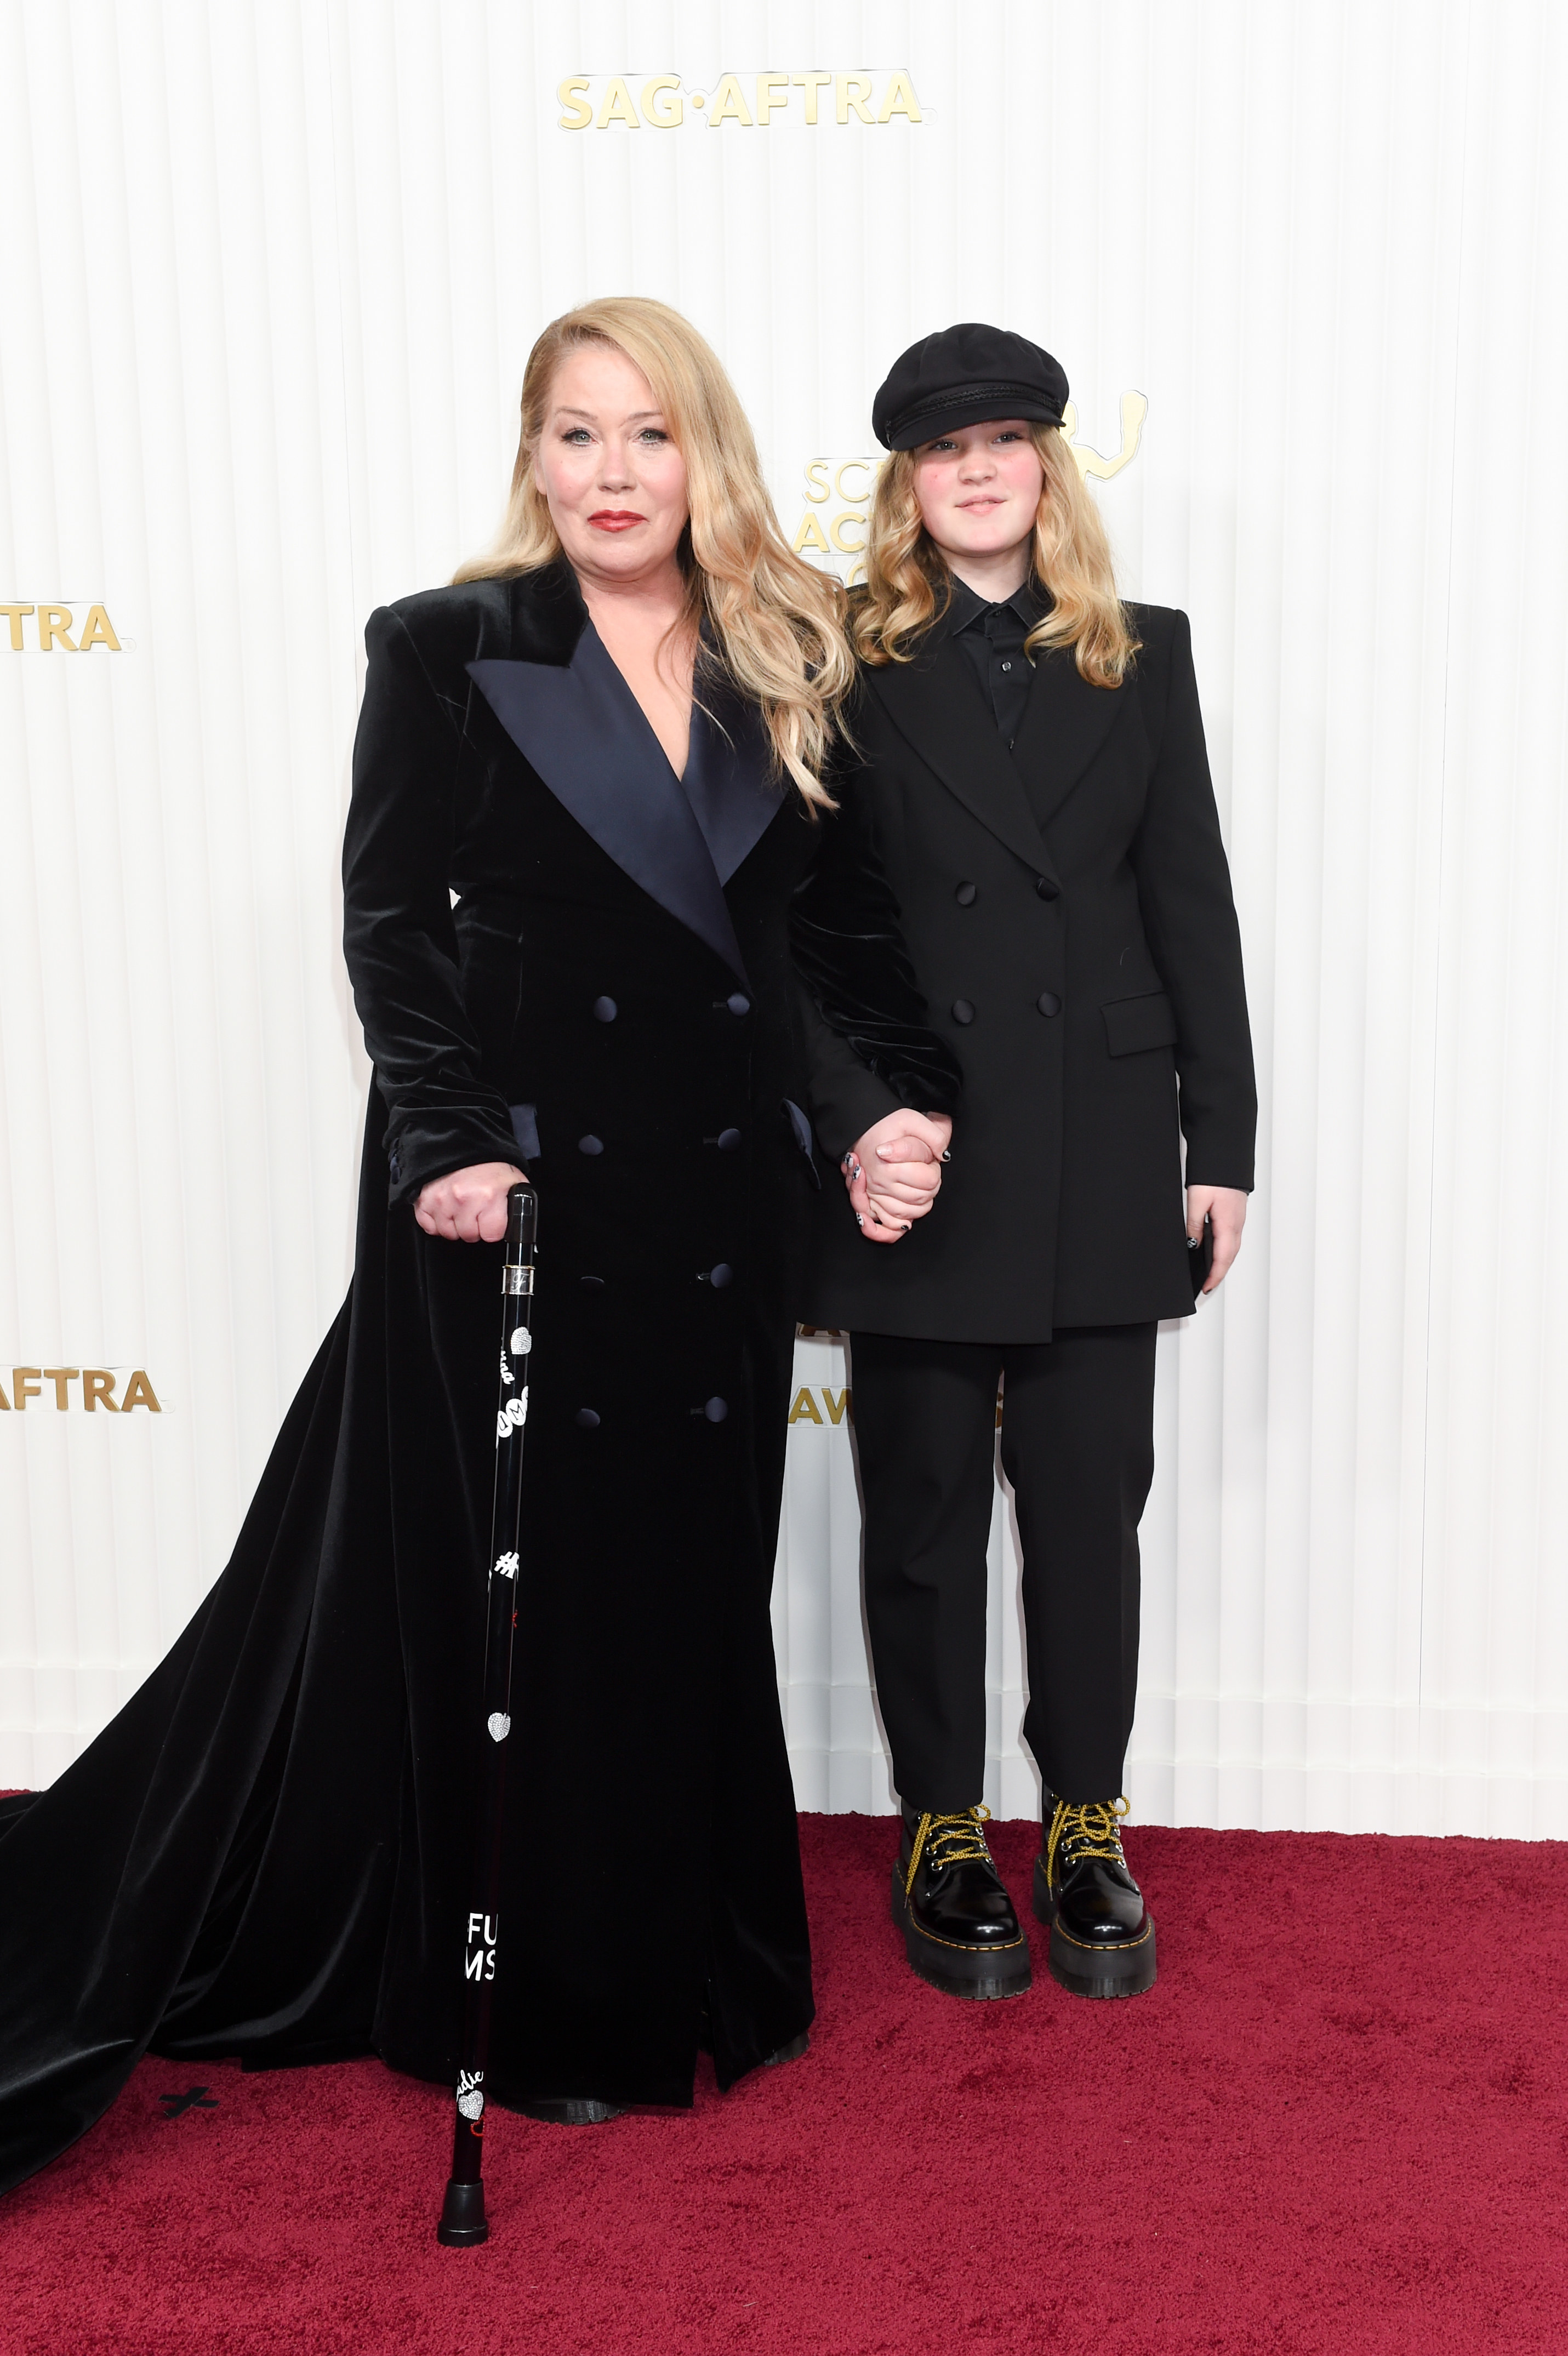 Christina Applegate with her daughter on the red carpet